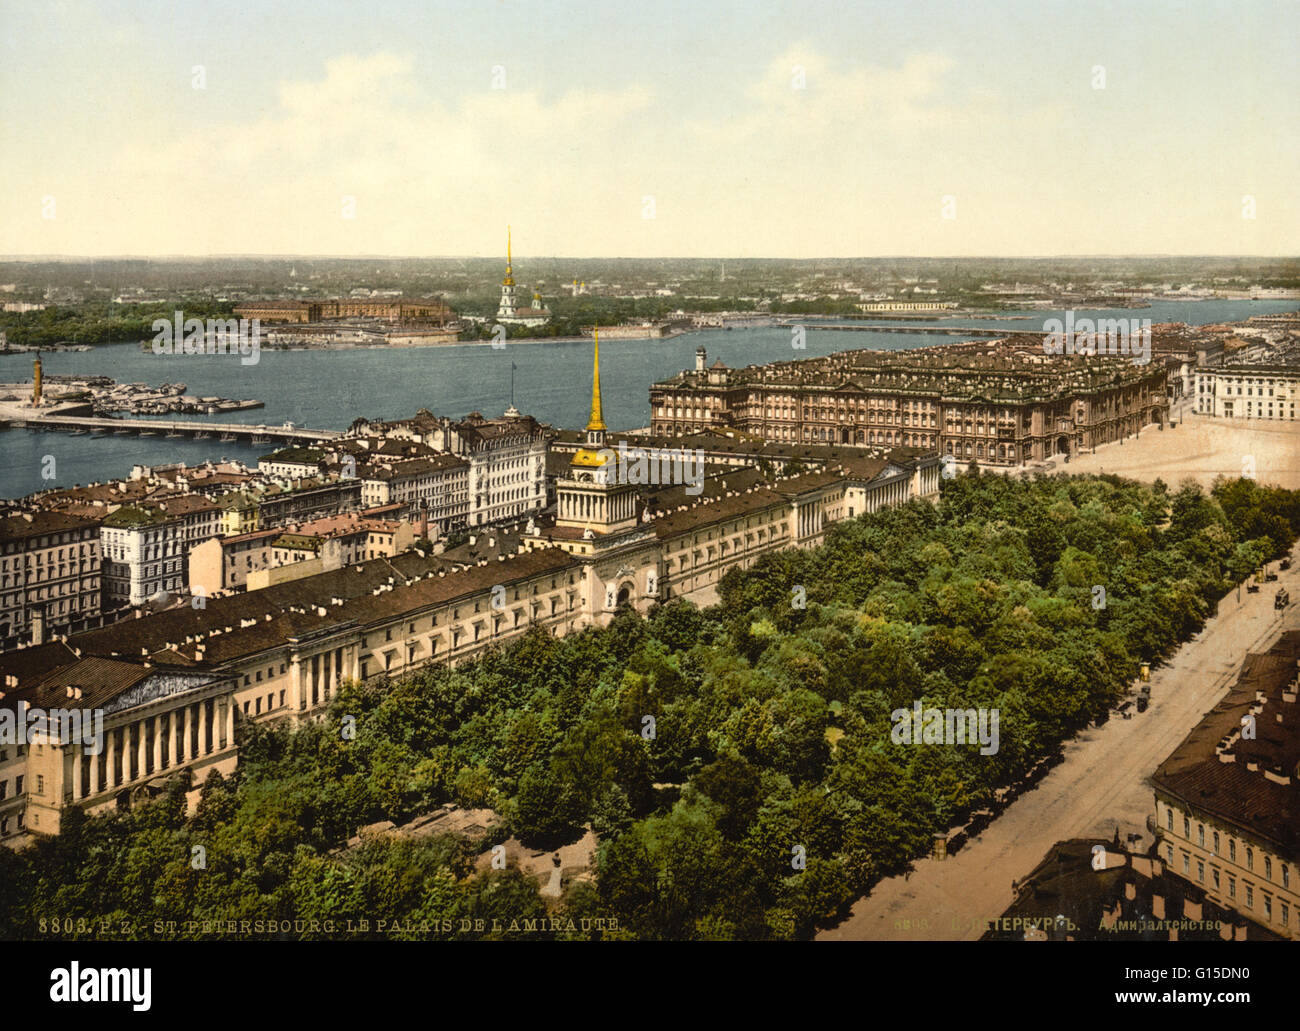 Photocrom postcard view of the Admiralty Palace, St. Petersburg, Russia, circa 1890-1900. Stock Photo